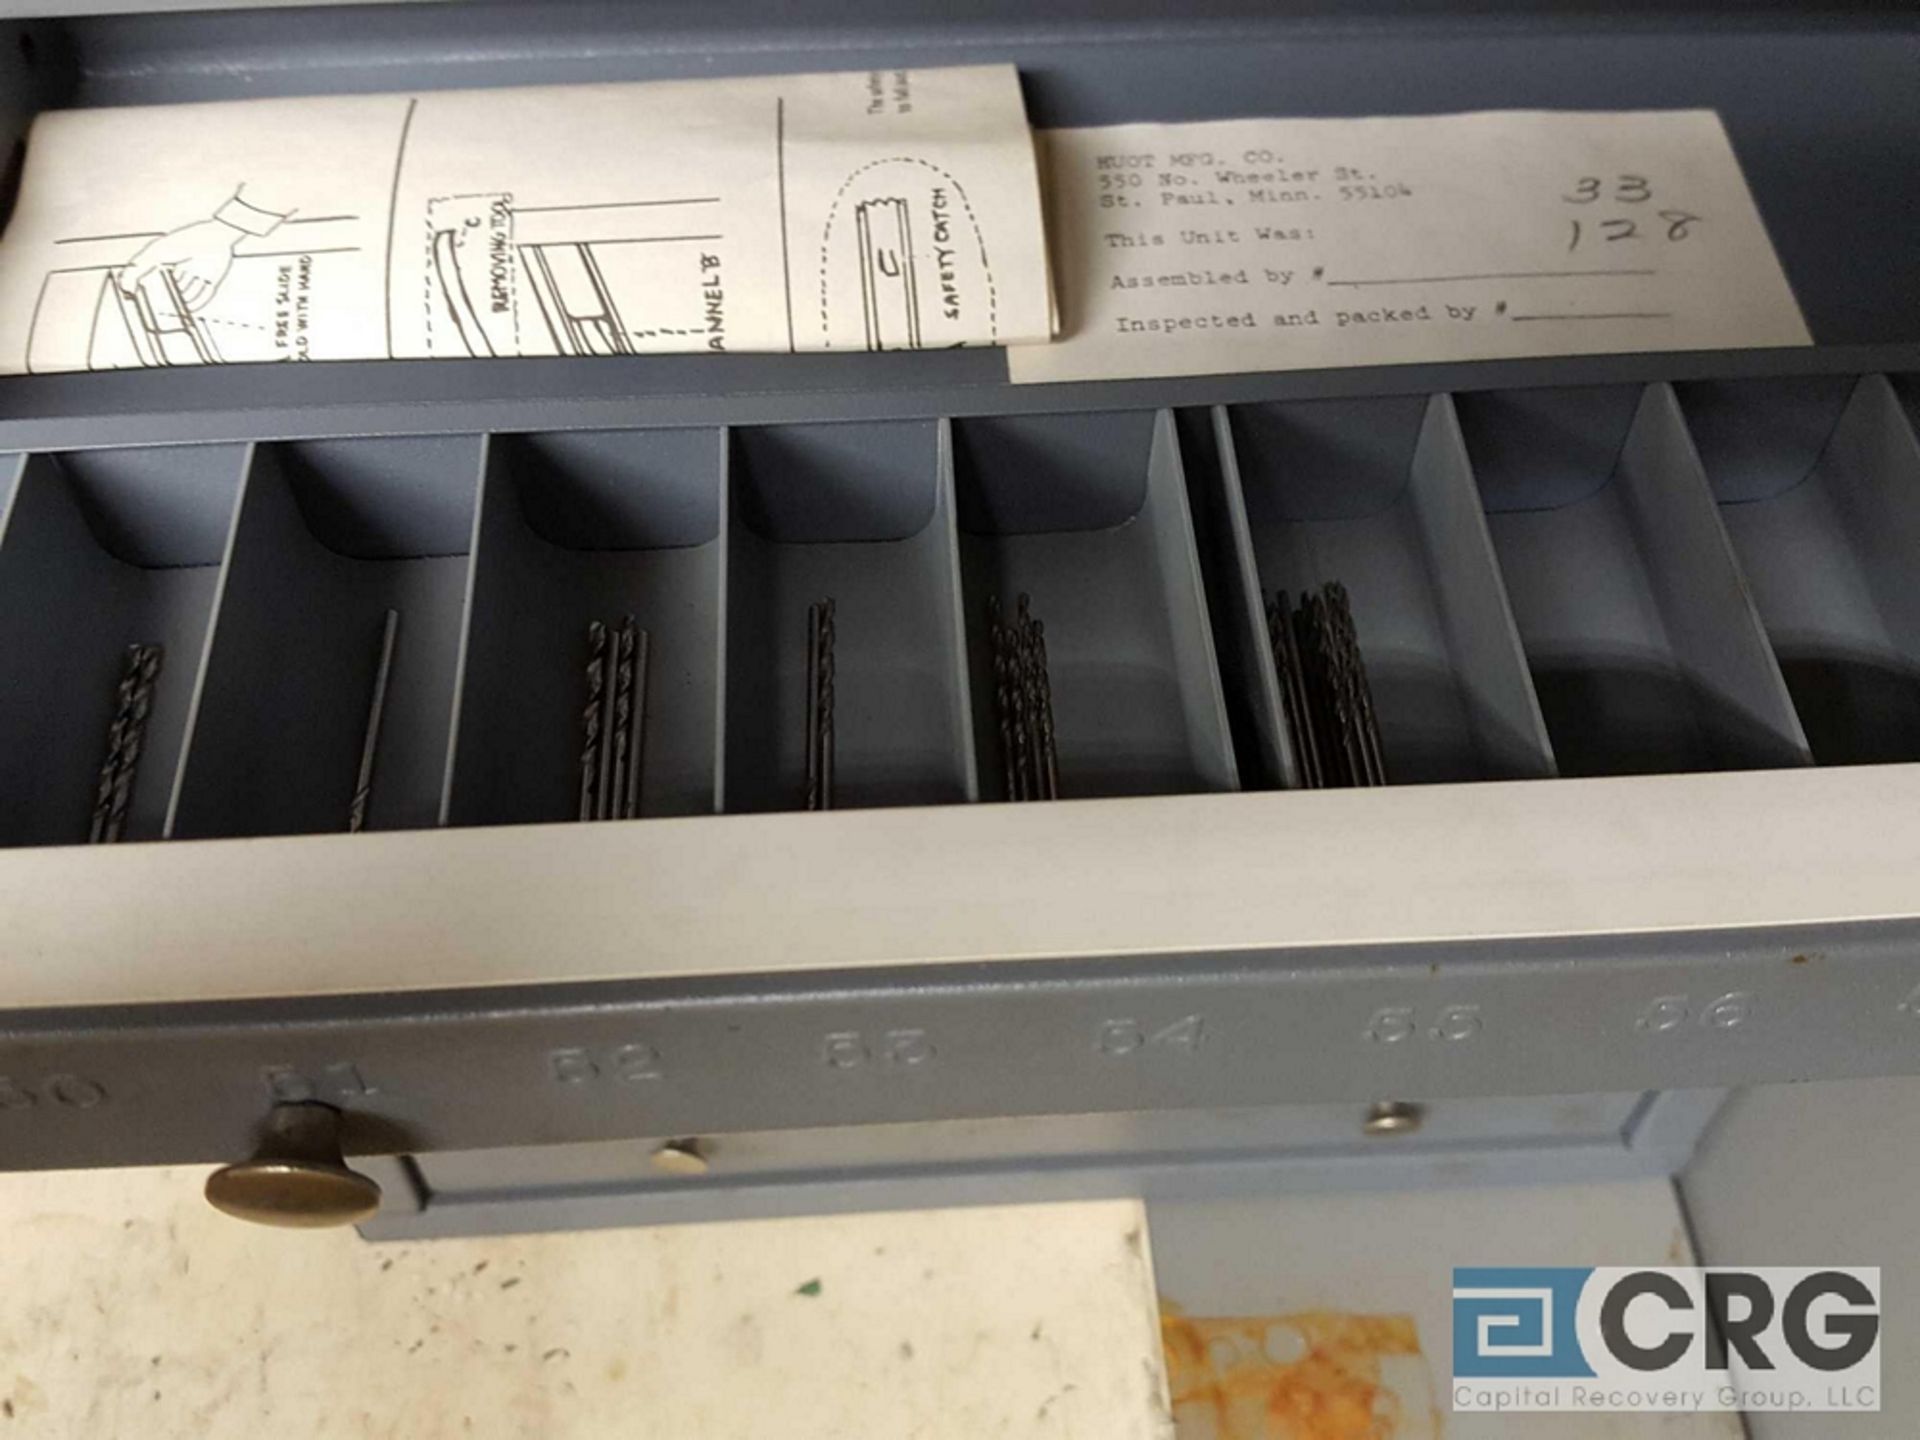 Lot includes (2) assorted cabinets and contents of assorted drill bits, tooling and accessories - Image 26 of 34